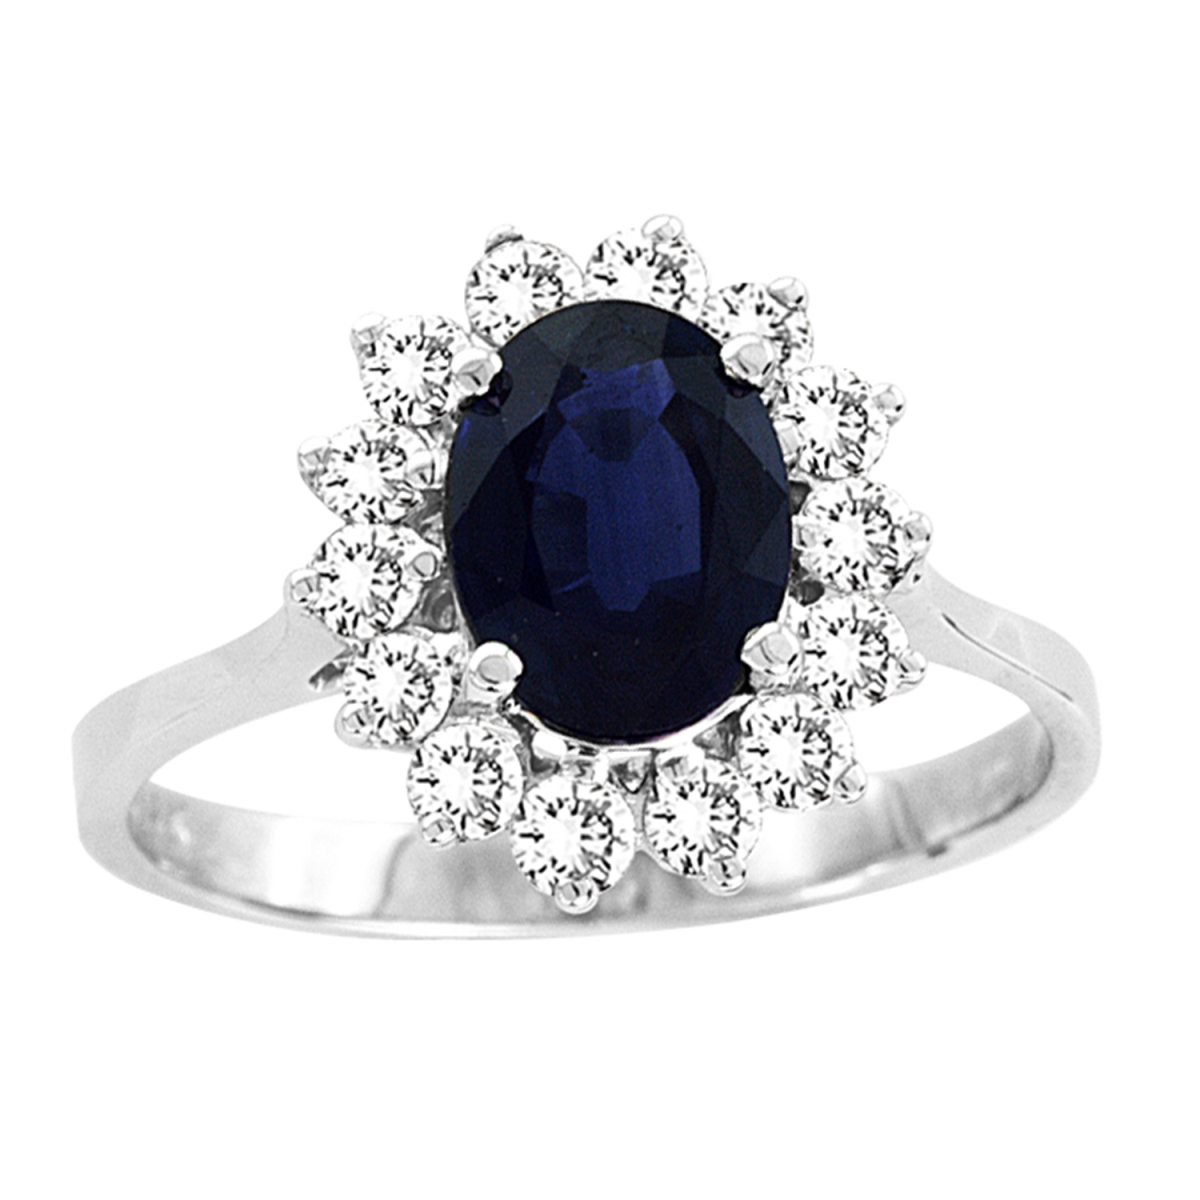 Picture of Louis Creations R1548SD-5 14K Gold Royal Collection 1.75 CTTW 8 x 6 mm 1.35 Carat Oval Sapphire Center Stone Natural Sapphire & Diamond Ring - Size 5